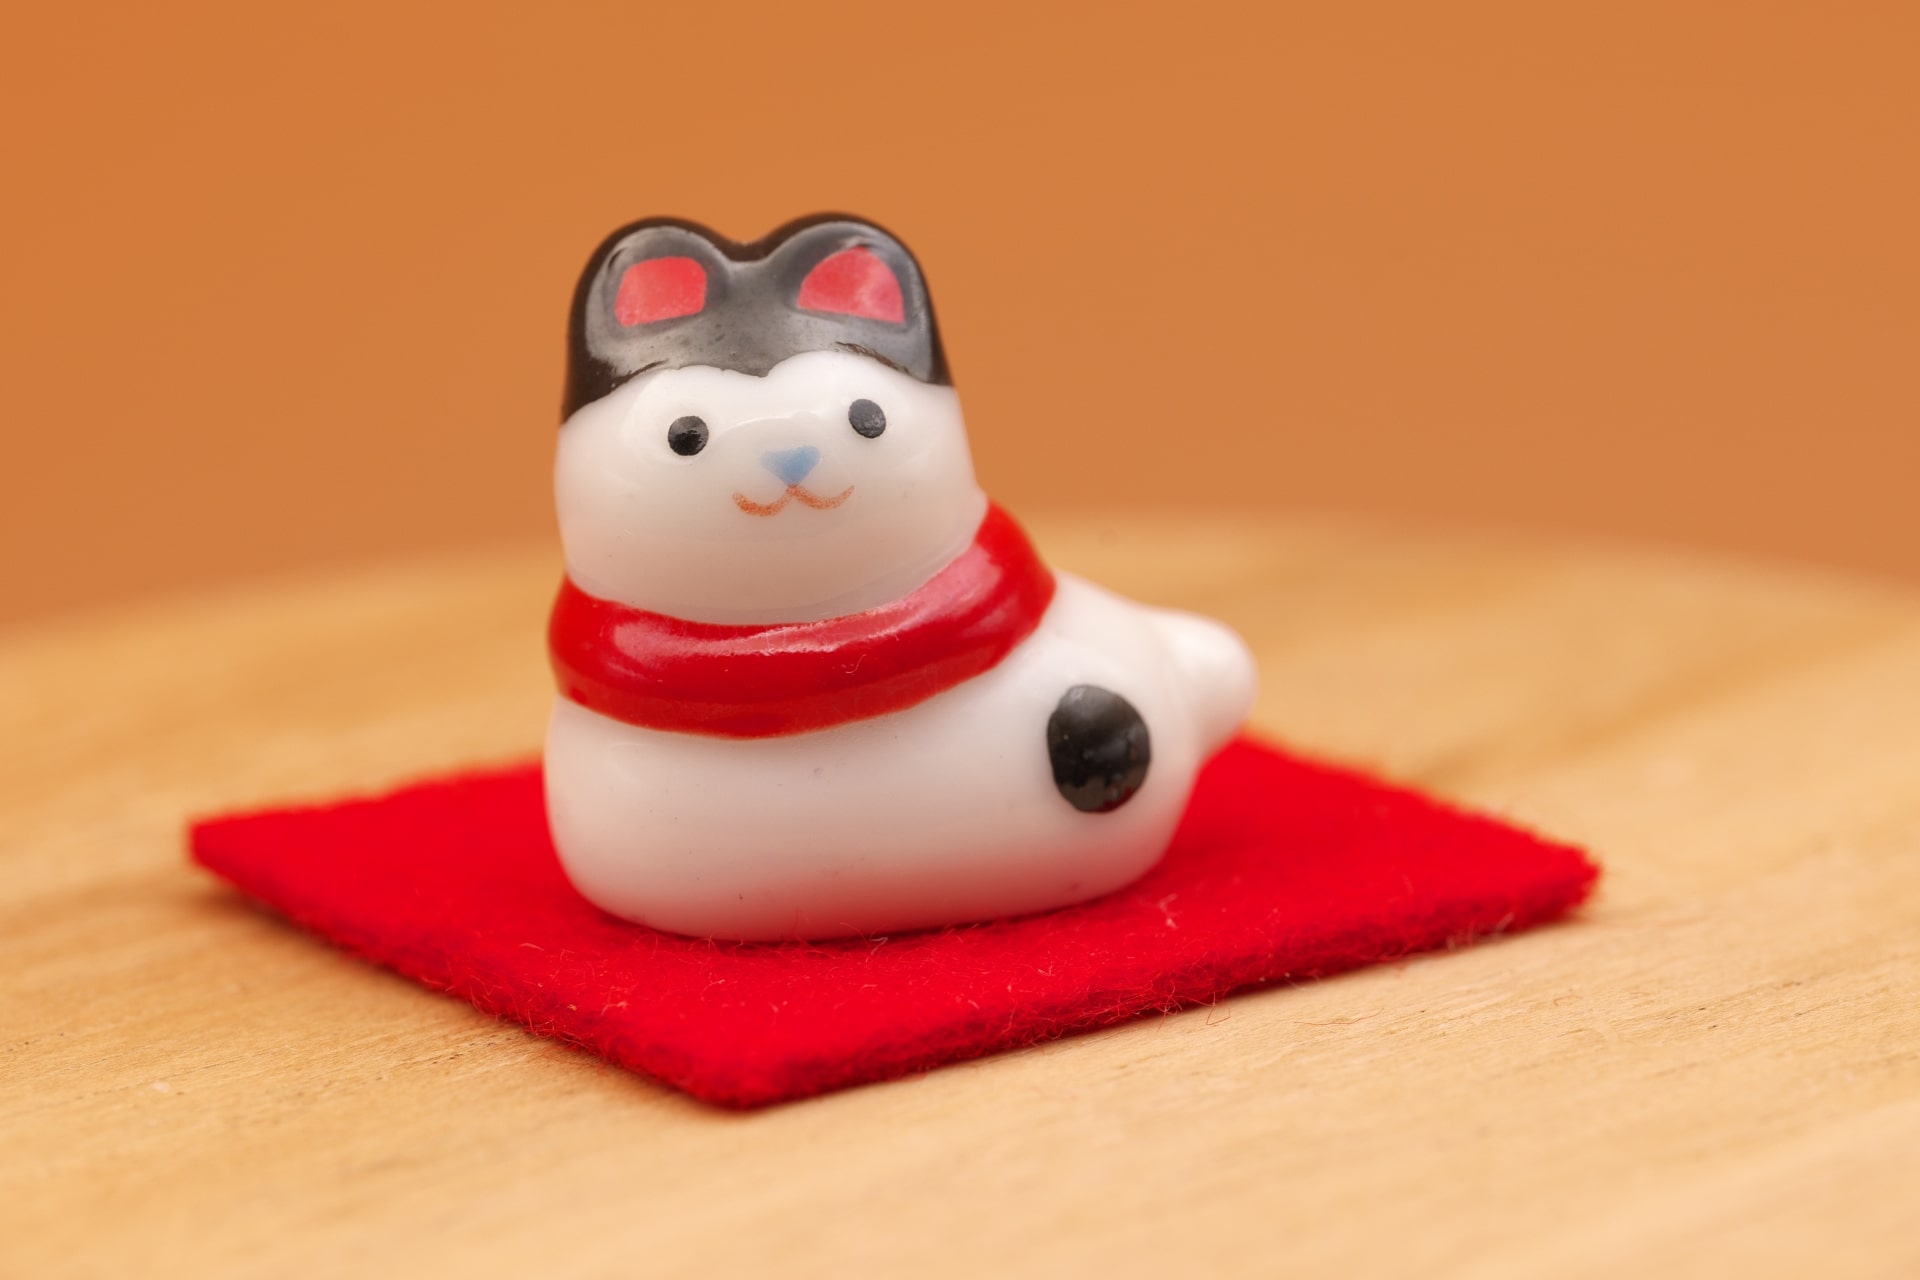 Small figurine depicting the dog from Chinese Zodiac